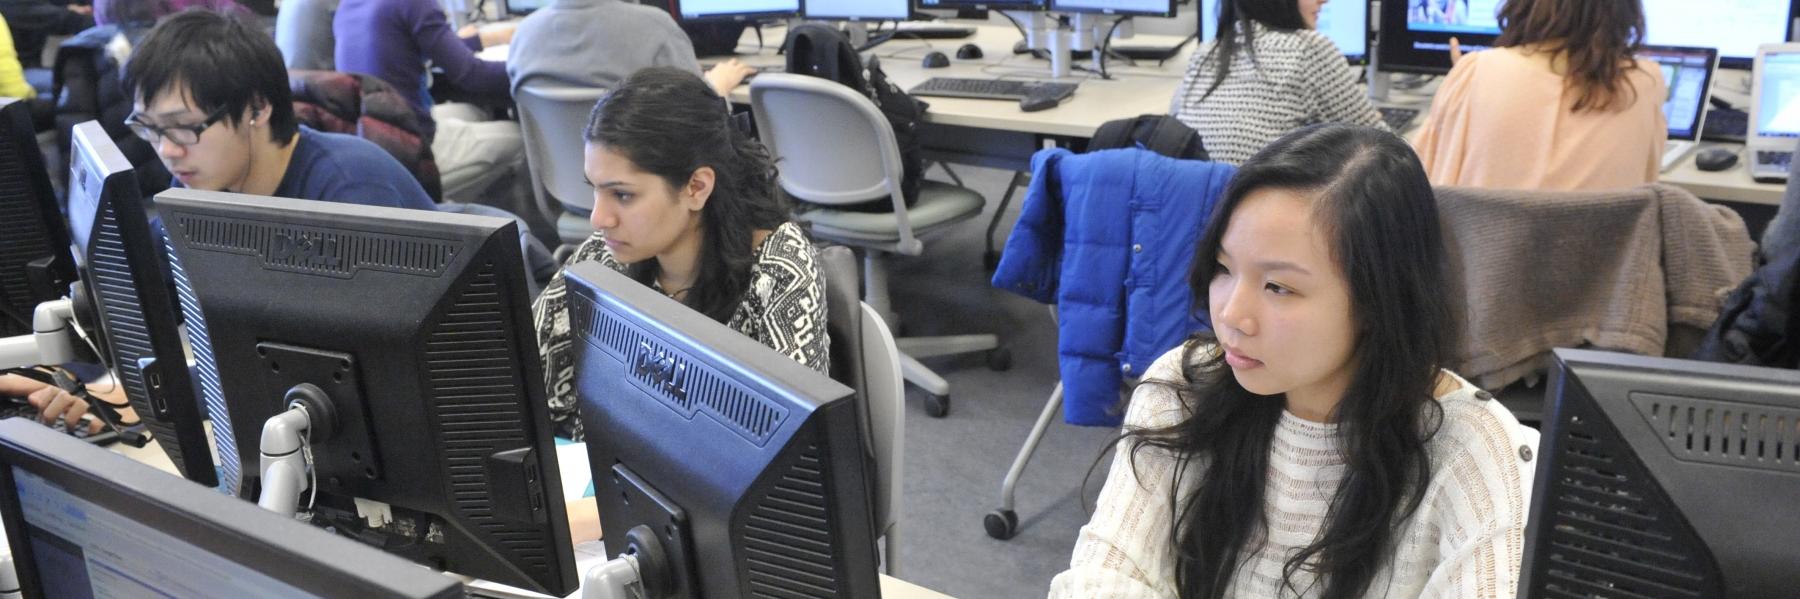 students in a finance lab